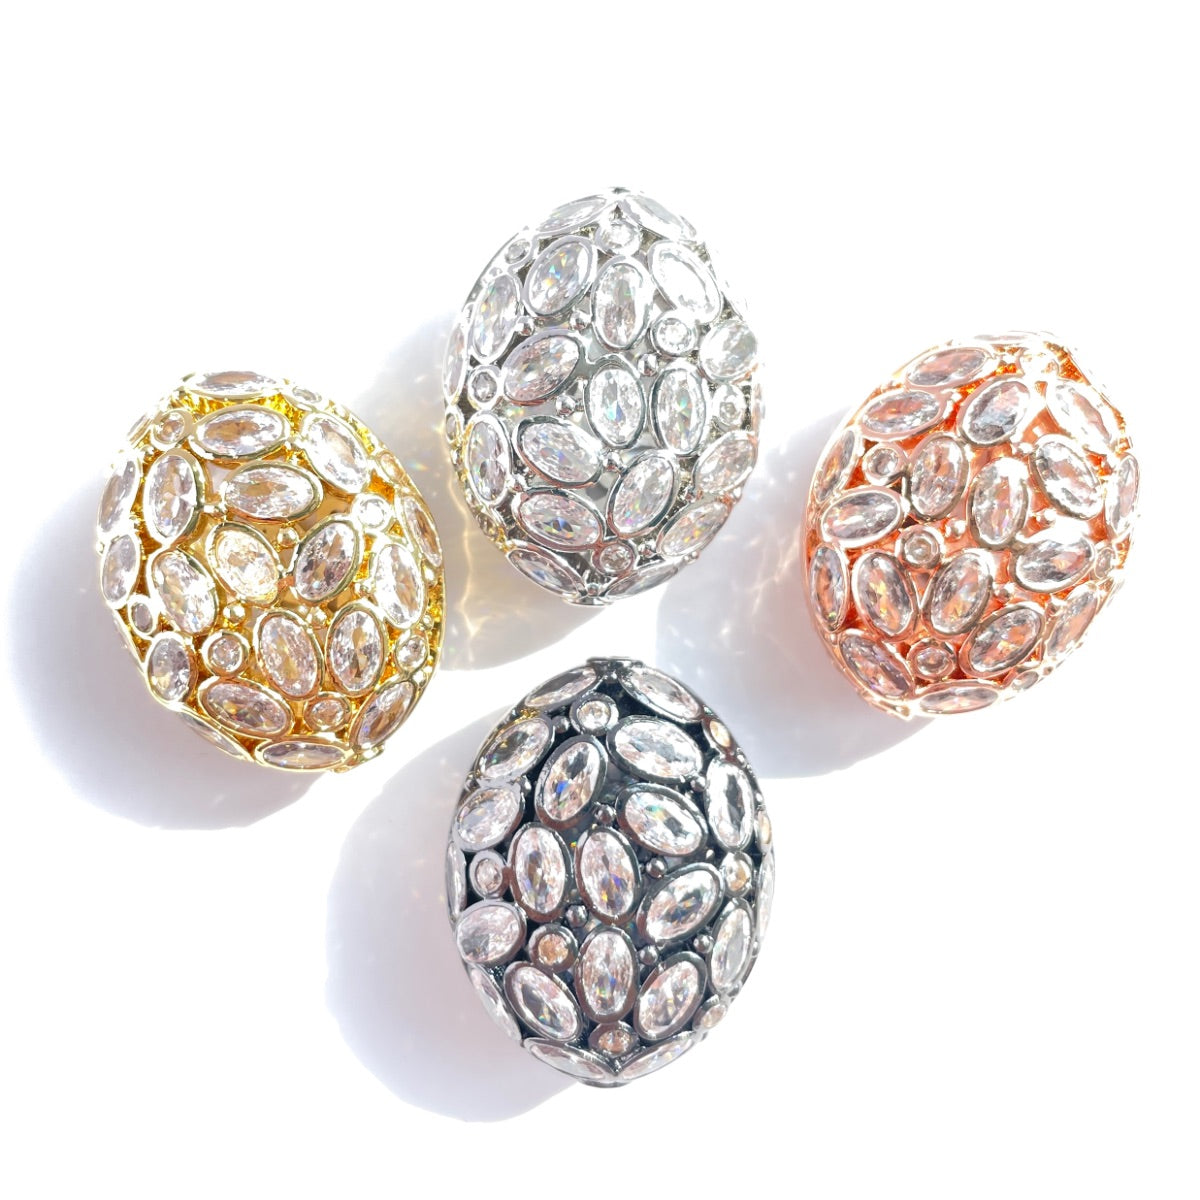 5pc 26.7*21mm Big Size Clear CZ Hollow Flat Oval Centerpiece CZ Egg Beads Spacers Mix Colors CZ Paved Spacers Egg Beads Charms Beads Beyond